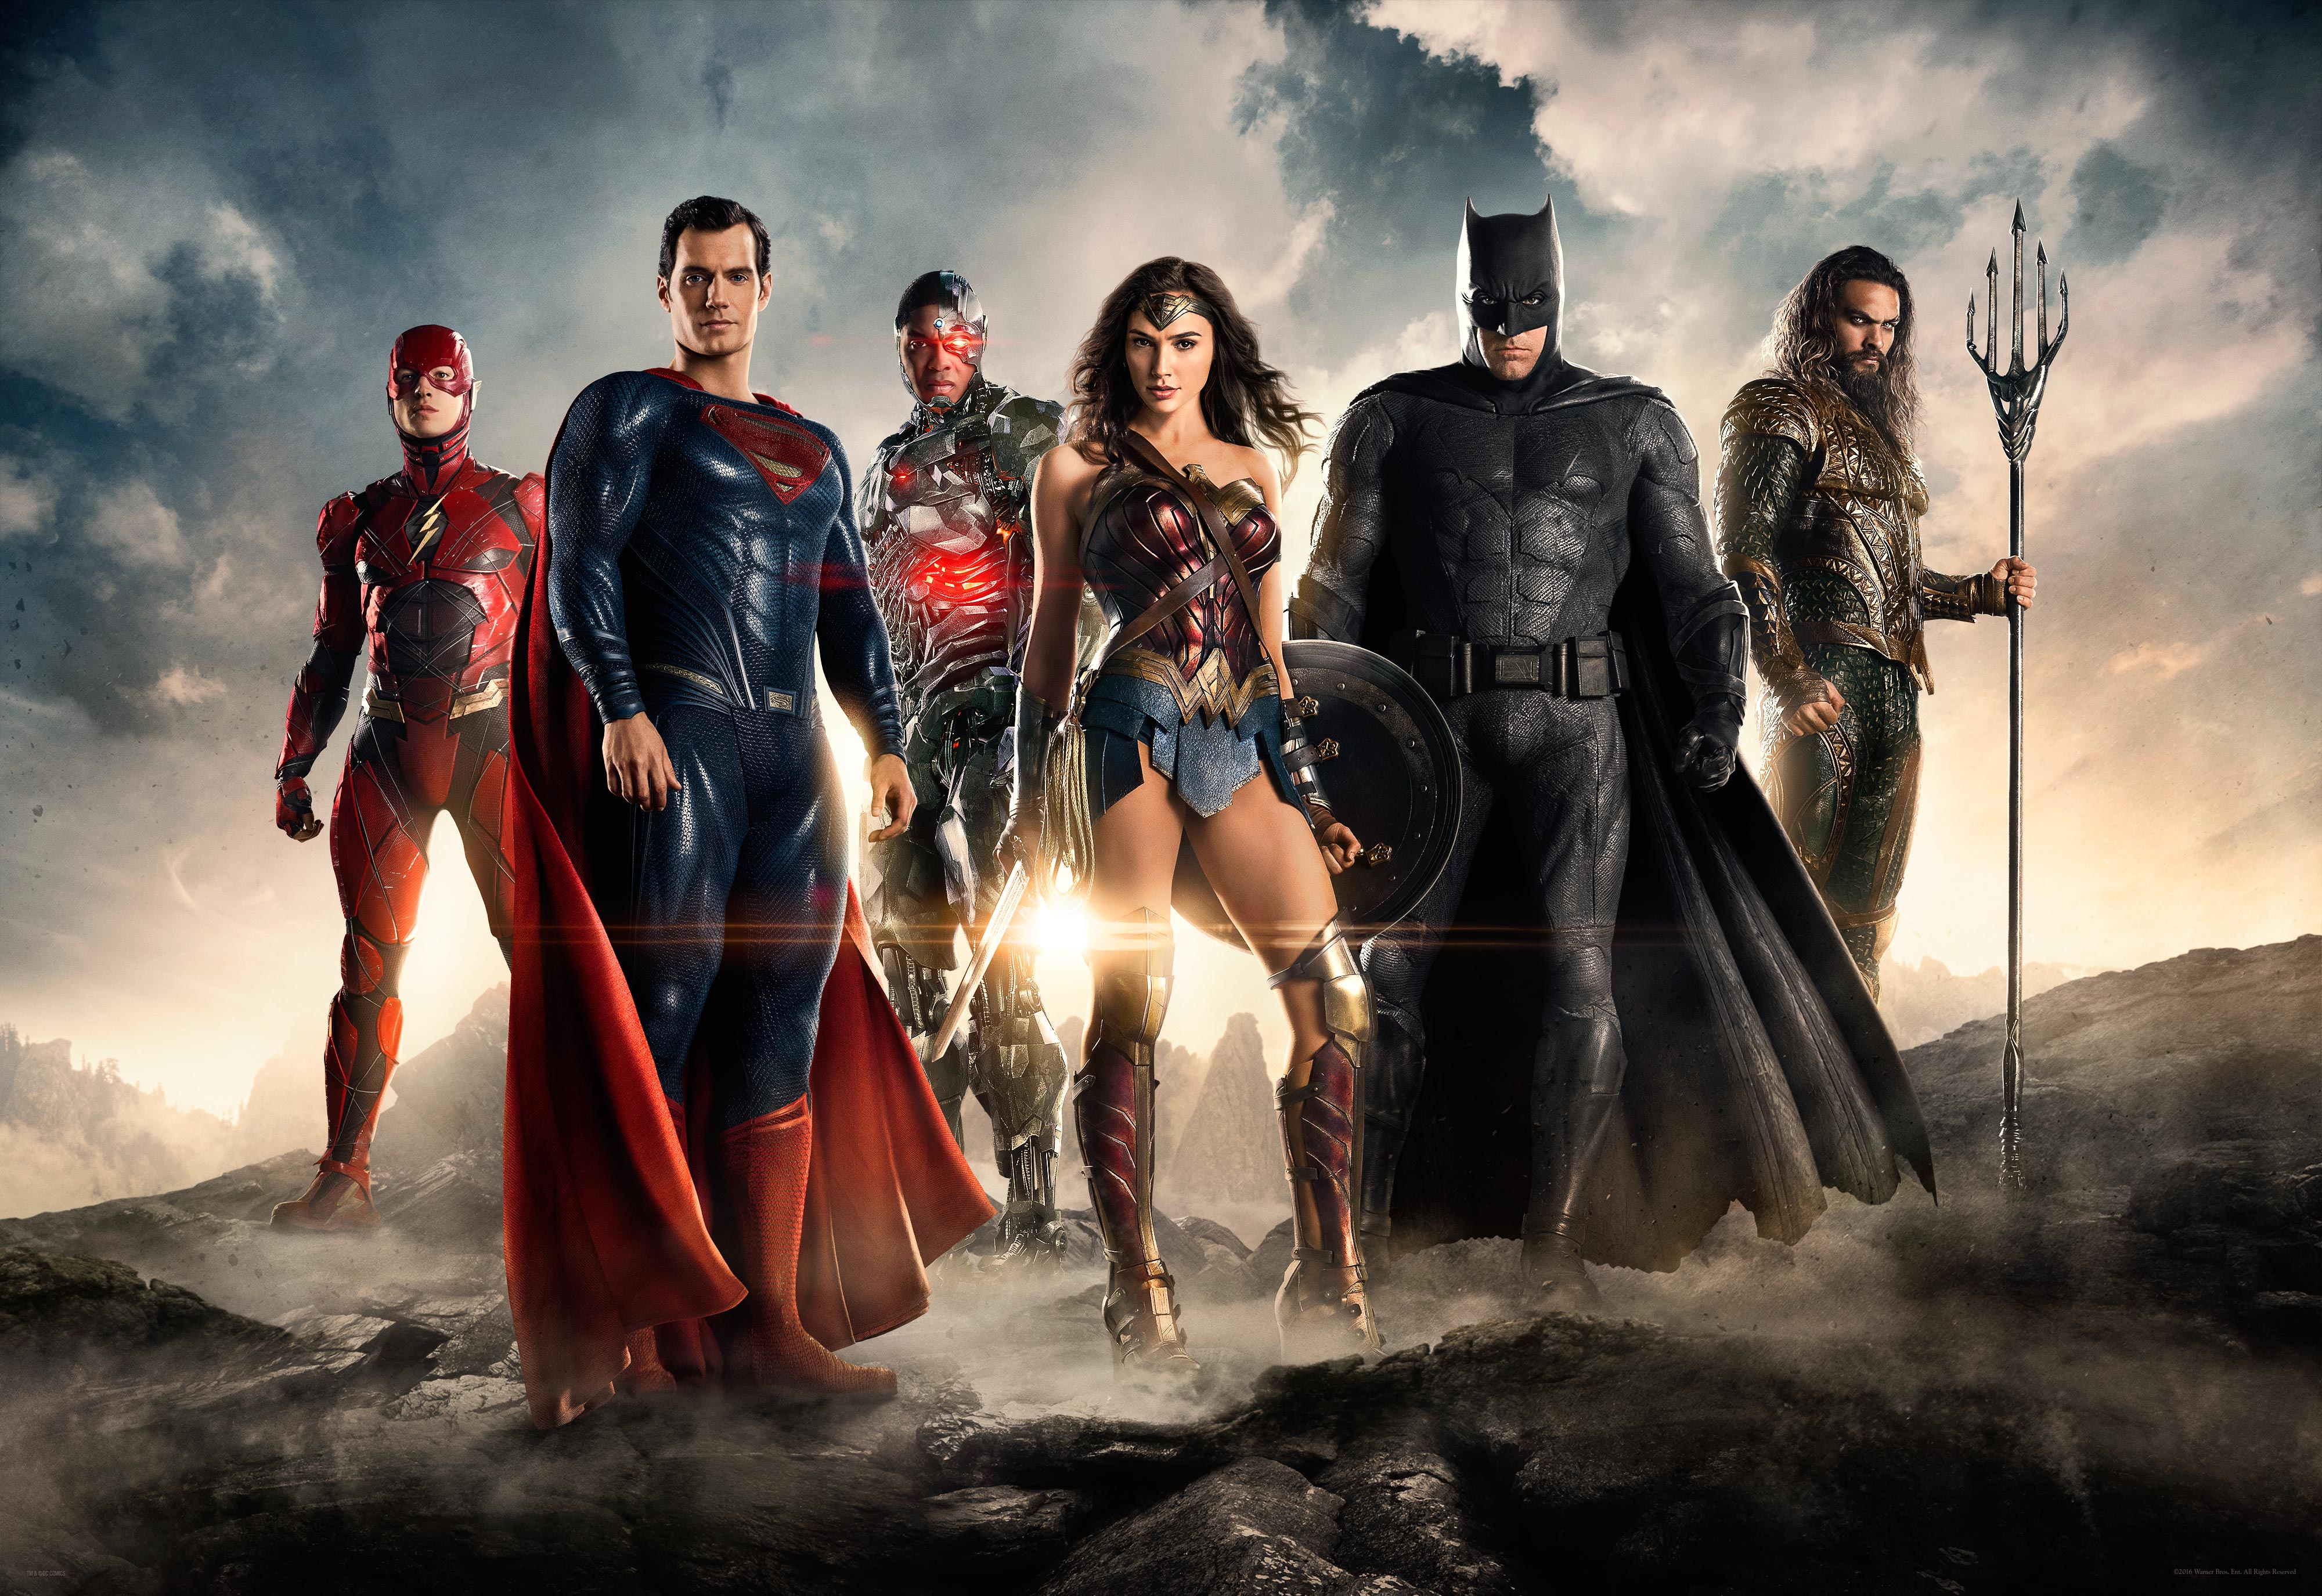 Is Henry Cavill teasing Superman's black costume for 'Justice League'?